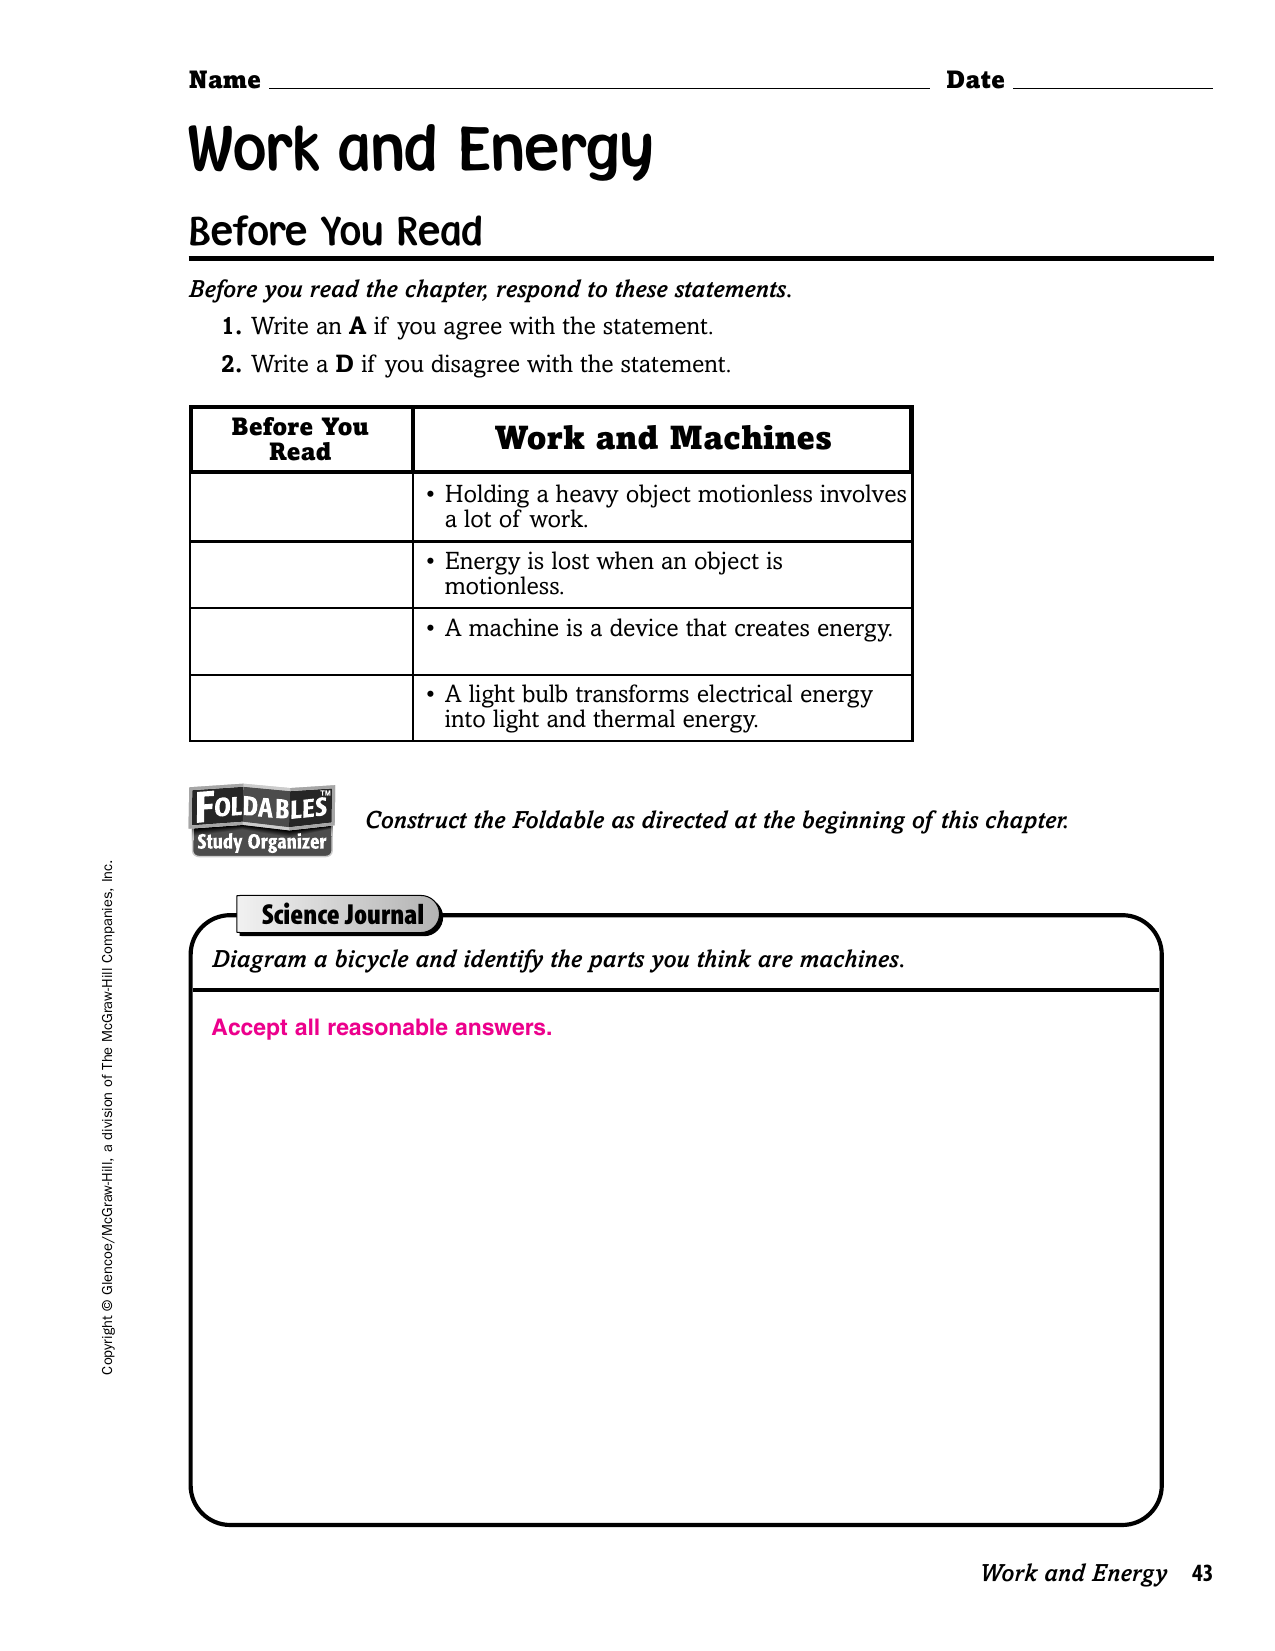 glencoe-mcgraw-hill-physical-science-worksheets-answers-study-guide-and-reinforcement-answer